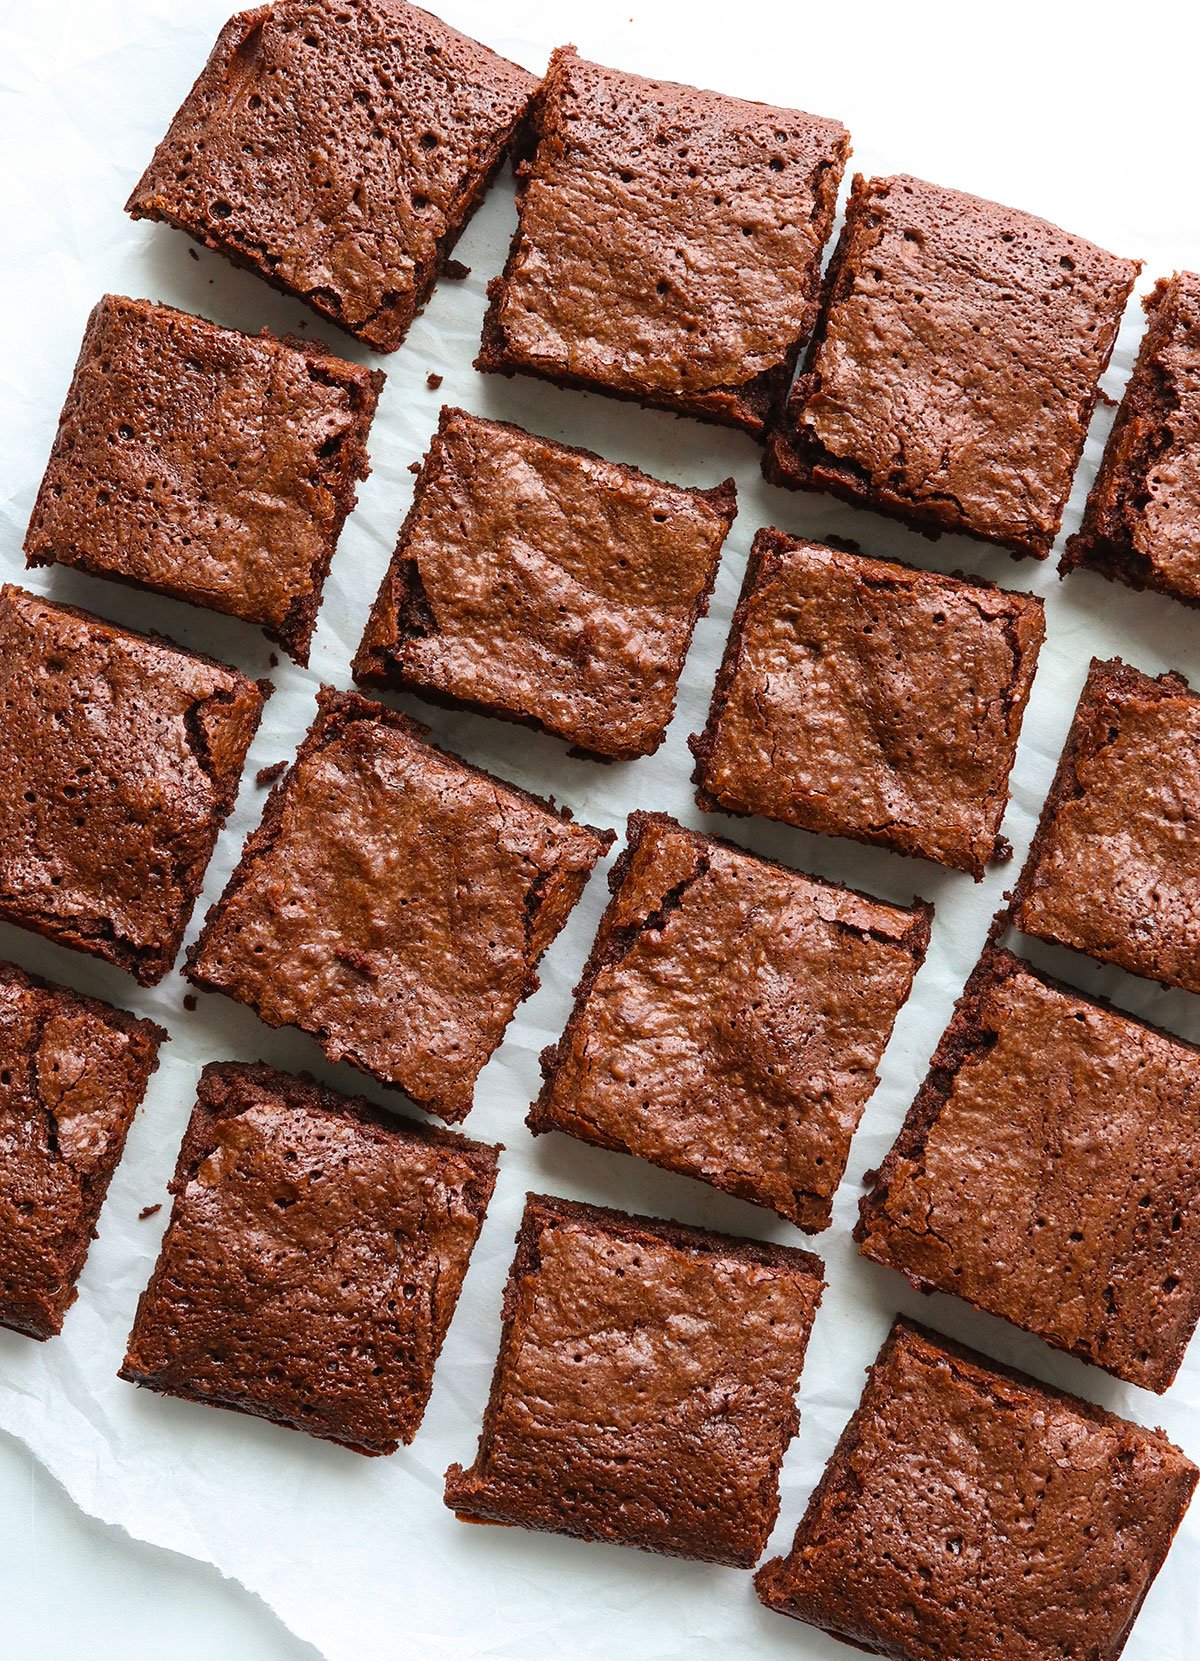 oat flour brownies sliced into 16 squares on parchment paper.